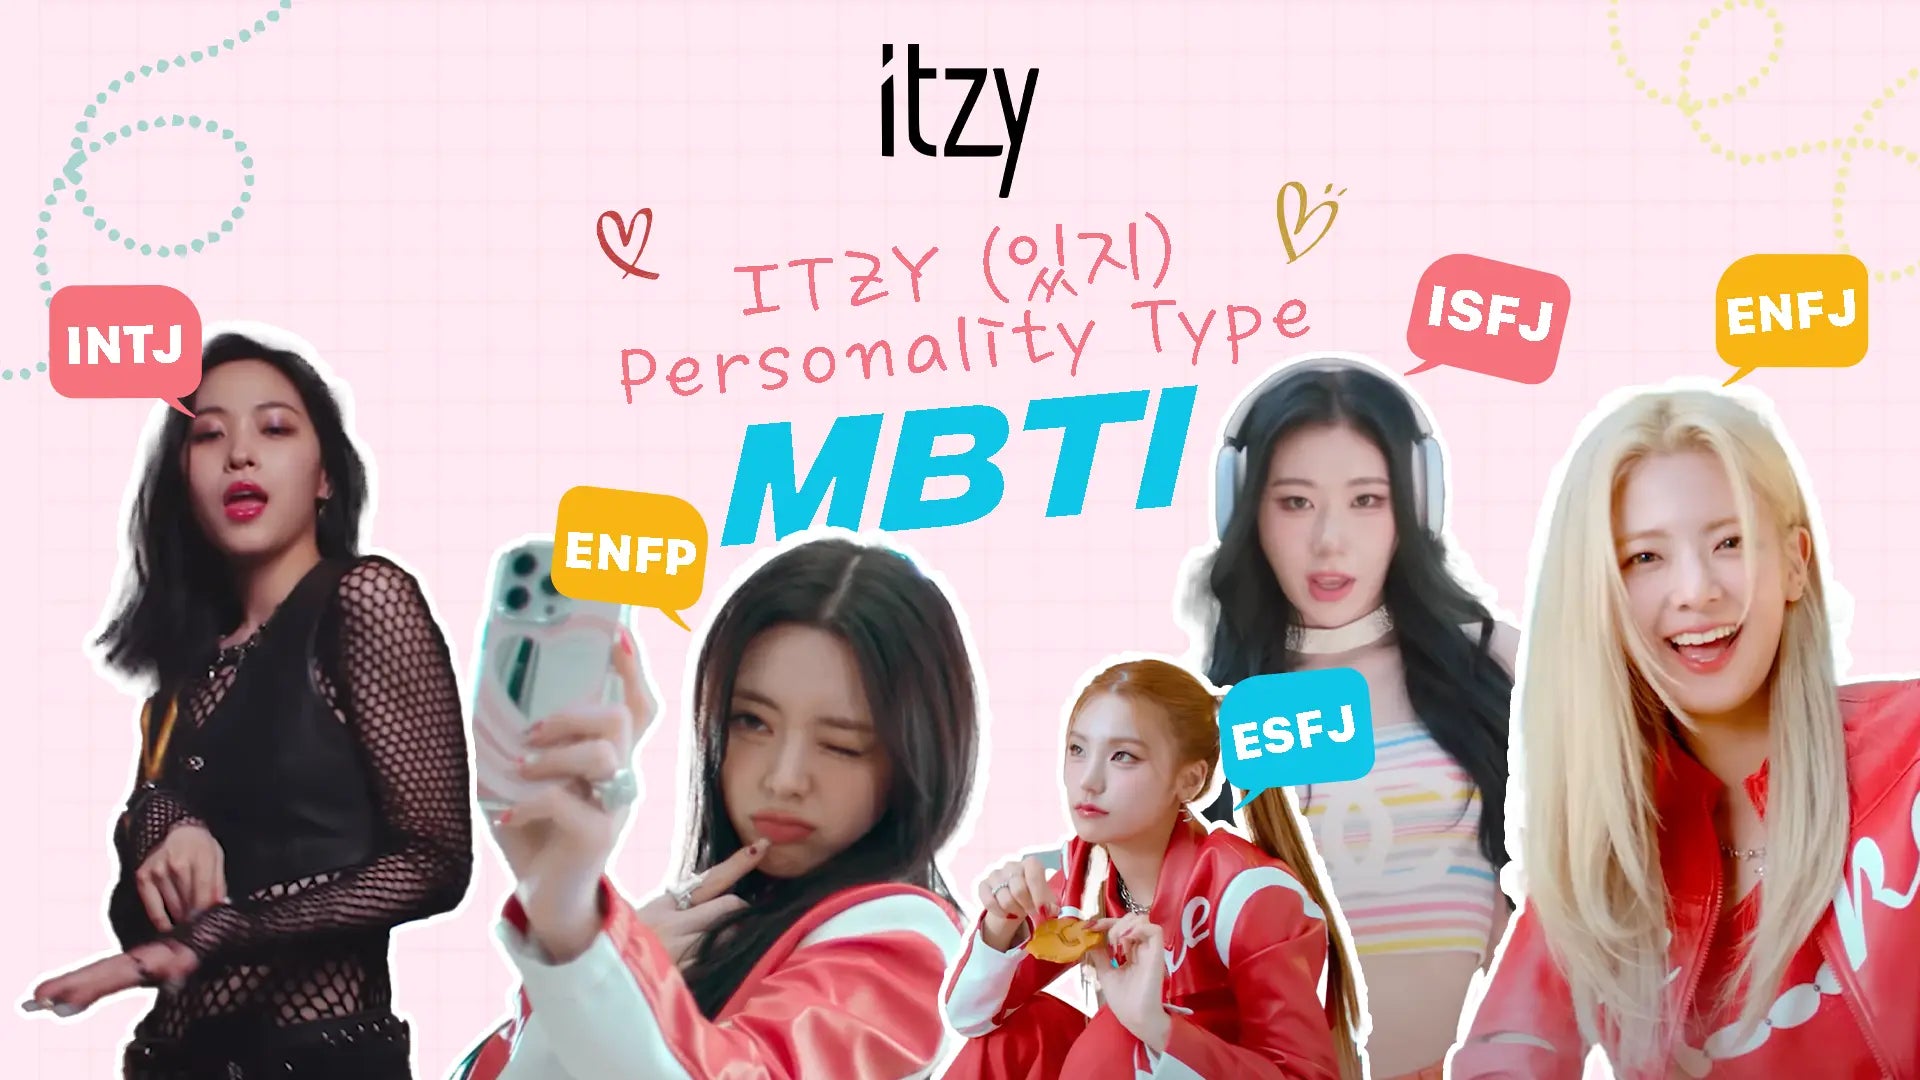 These 9 Idols Are All Officially INFPs—Do Their MBTI Personality